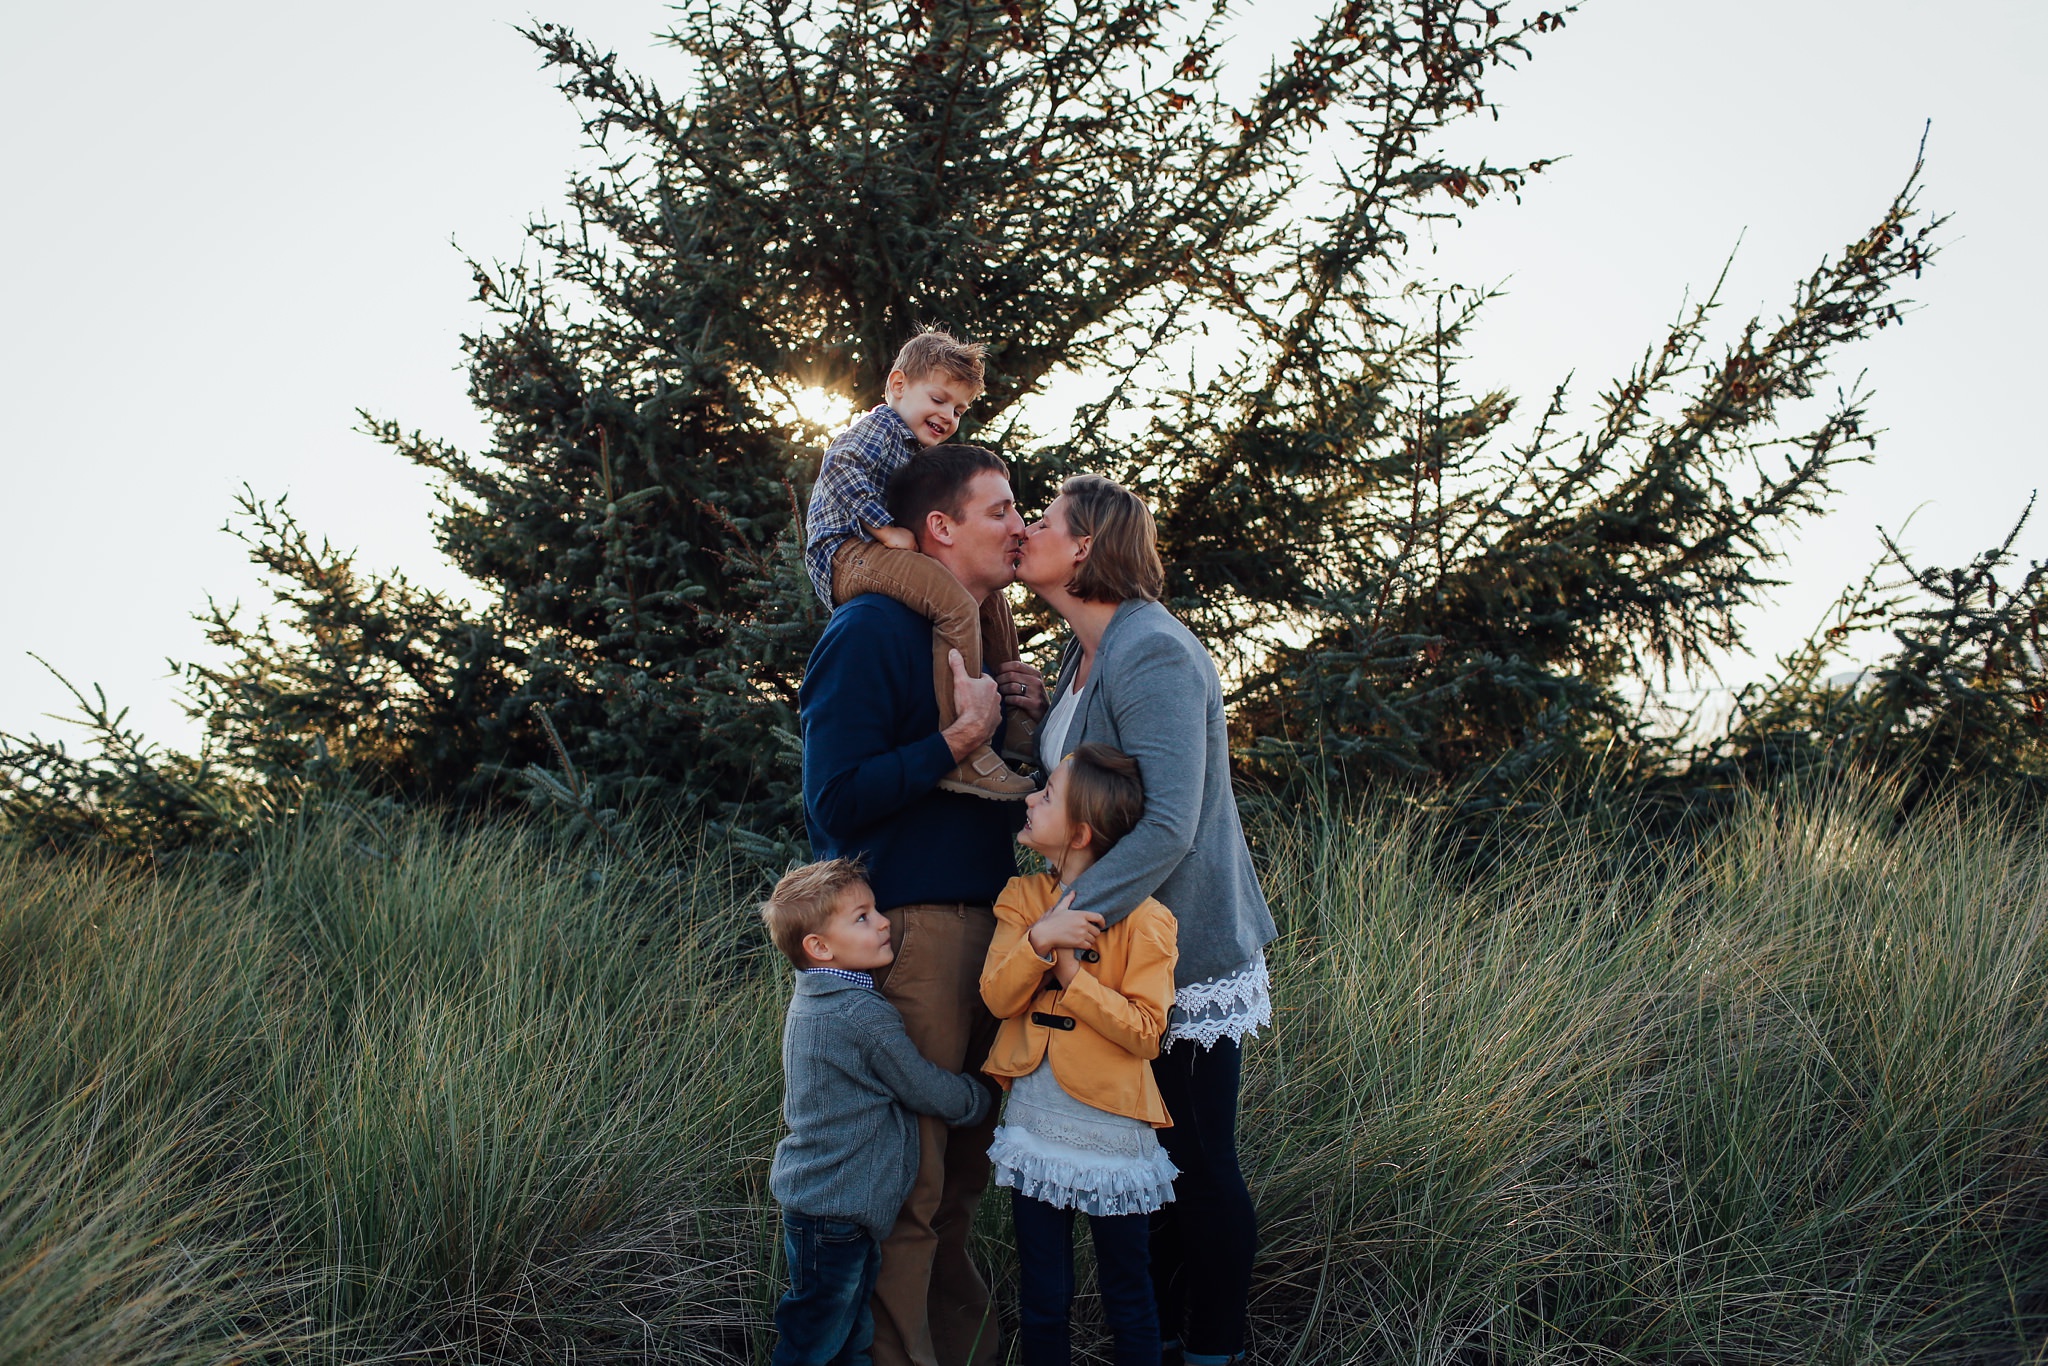 Whidbey-Island-Family-Photographer-Kara-Chappell-Photography_1173.jpg